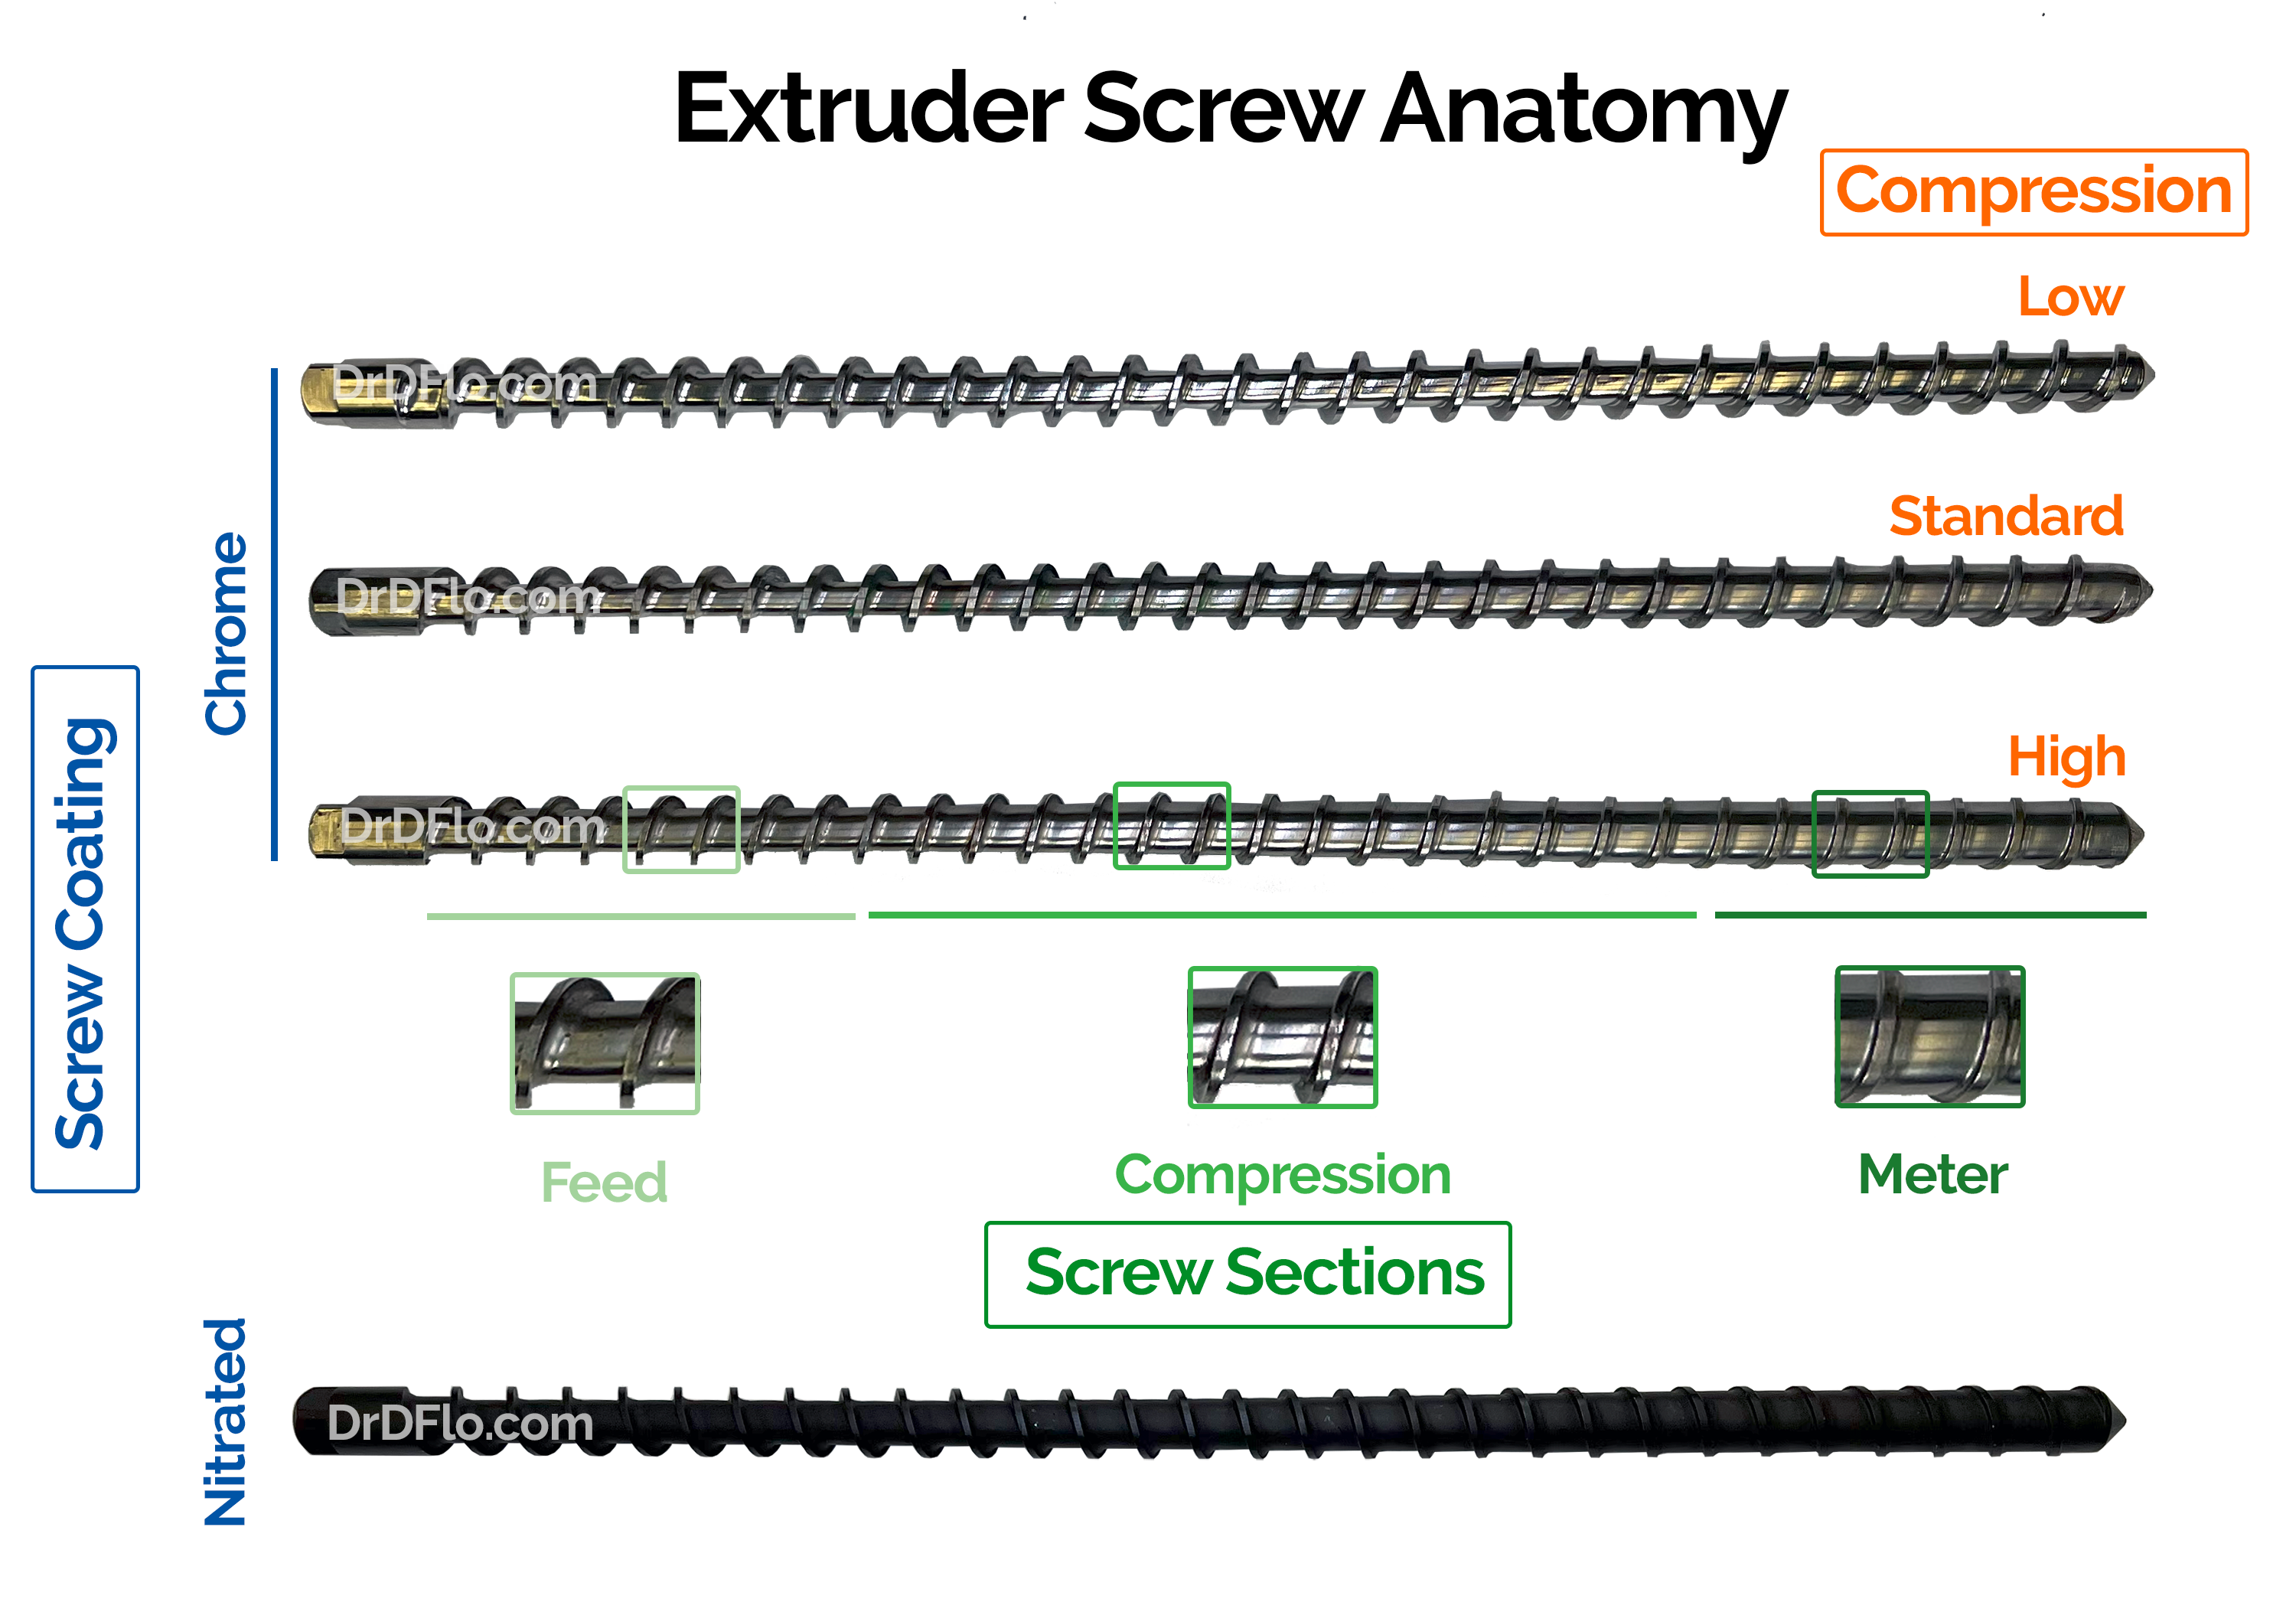 Anatomy of a screw for a plasticizing extruder. Highlighting different levels of screw compression, materials (chrome vs nitrated) and sections of the screw (feed, compression, and metering).